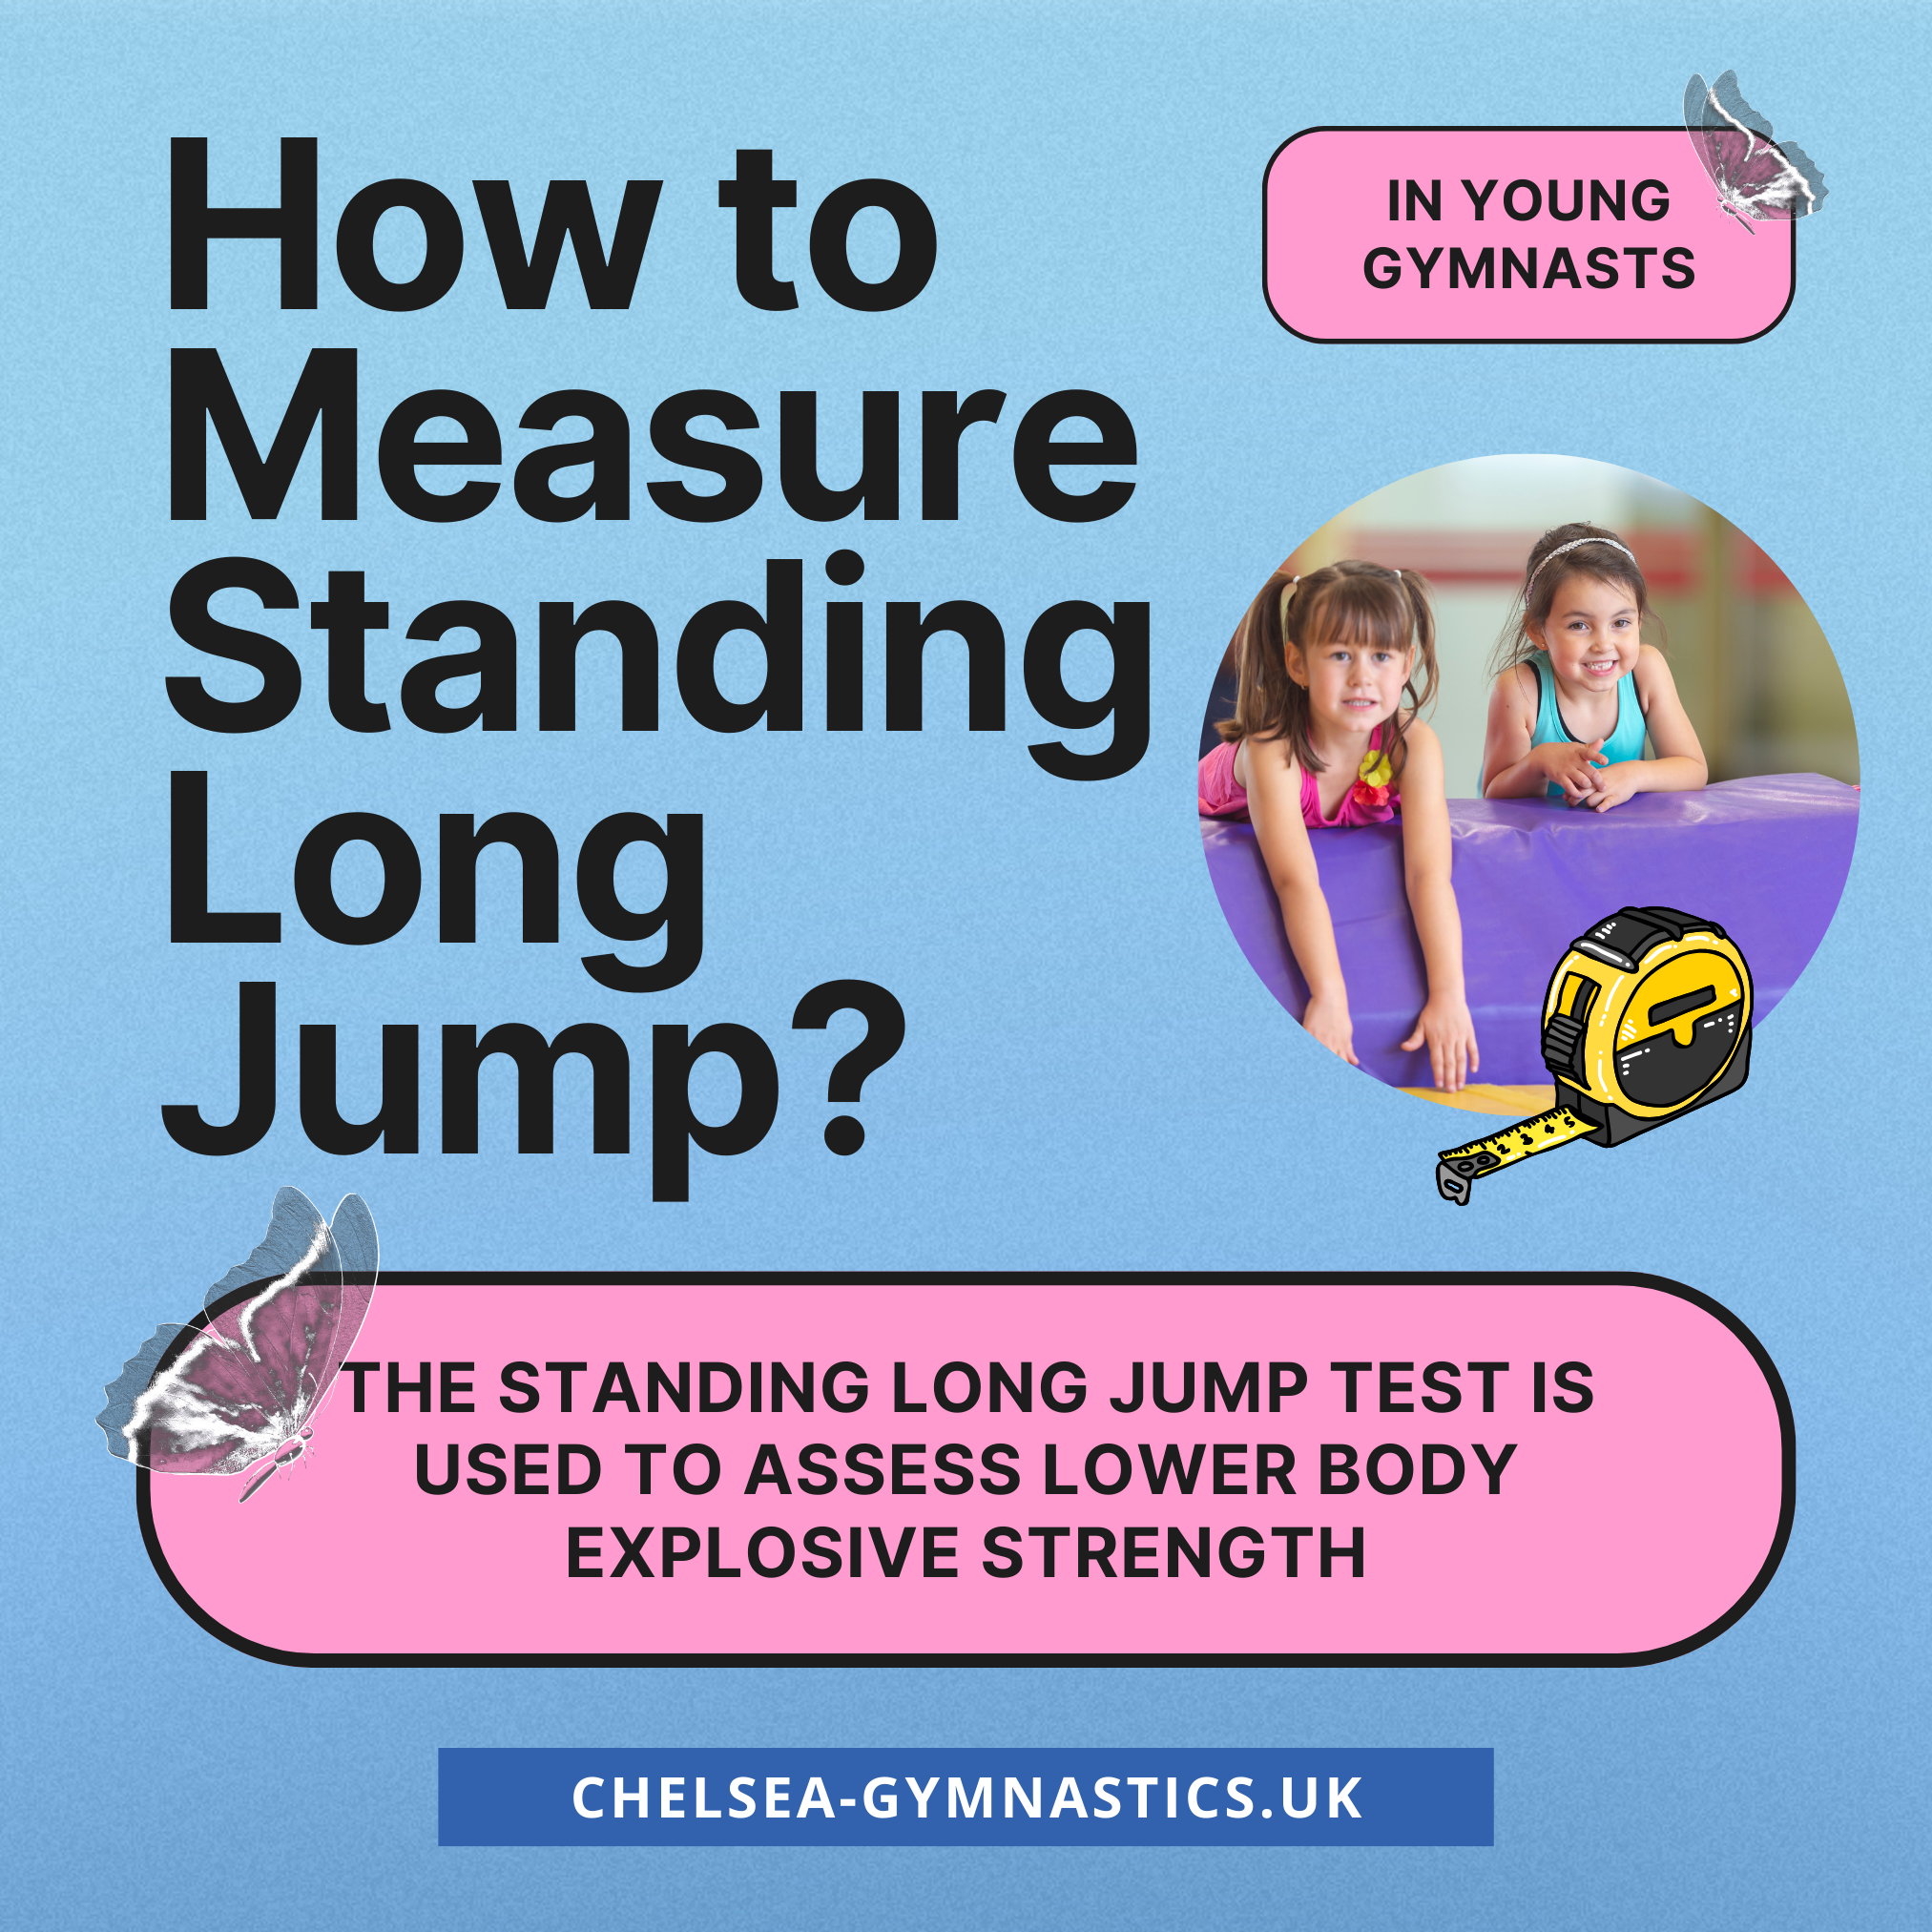 How to measure Standing Long Jump in gymnasts?